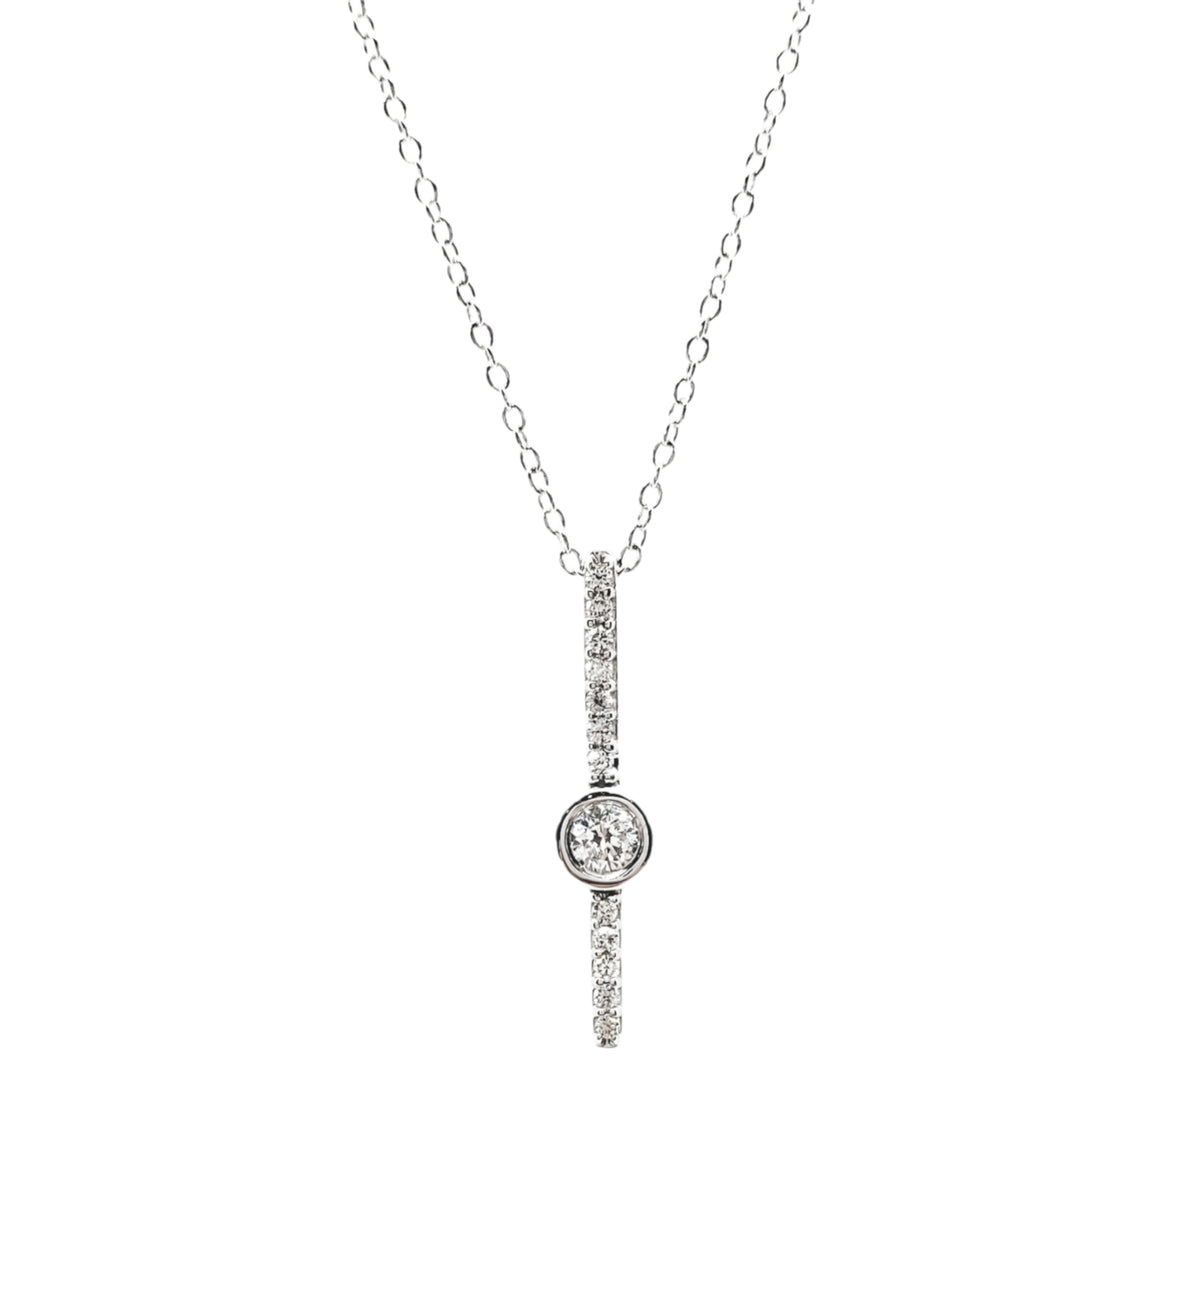 10K White Gold 0.11cttw Diamond Necklace with Cable Chain (Spring Clasp) - Adjustable 17 - 18 Inches